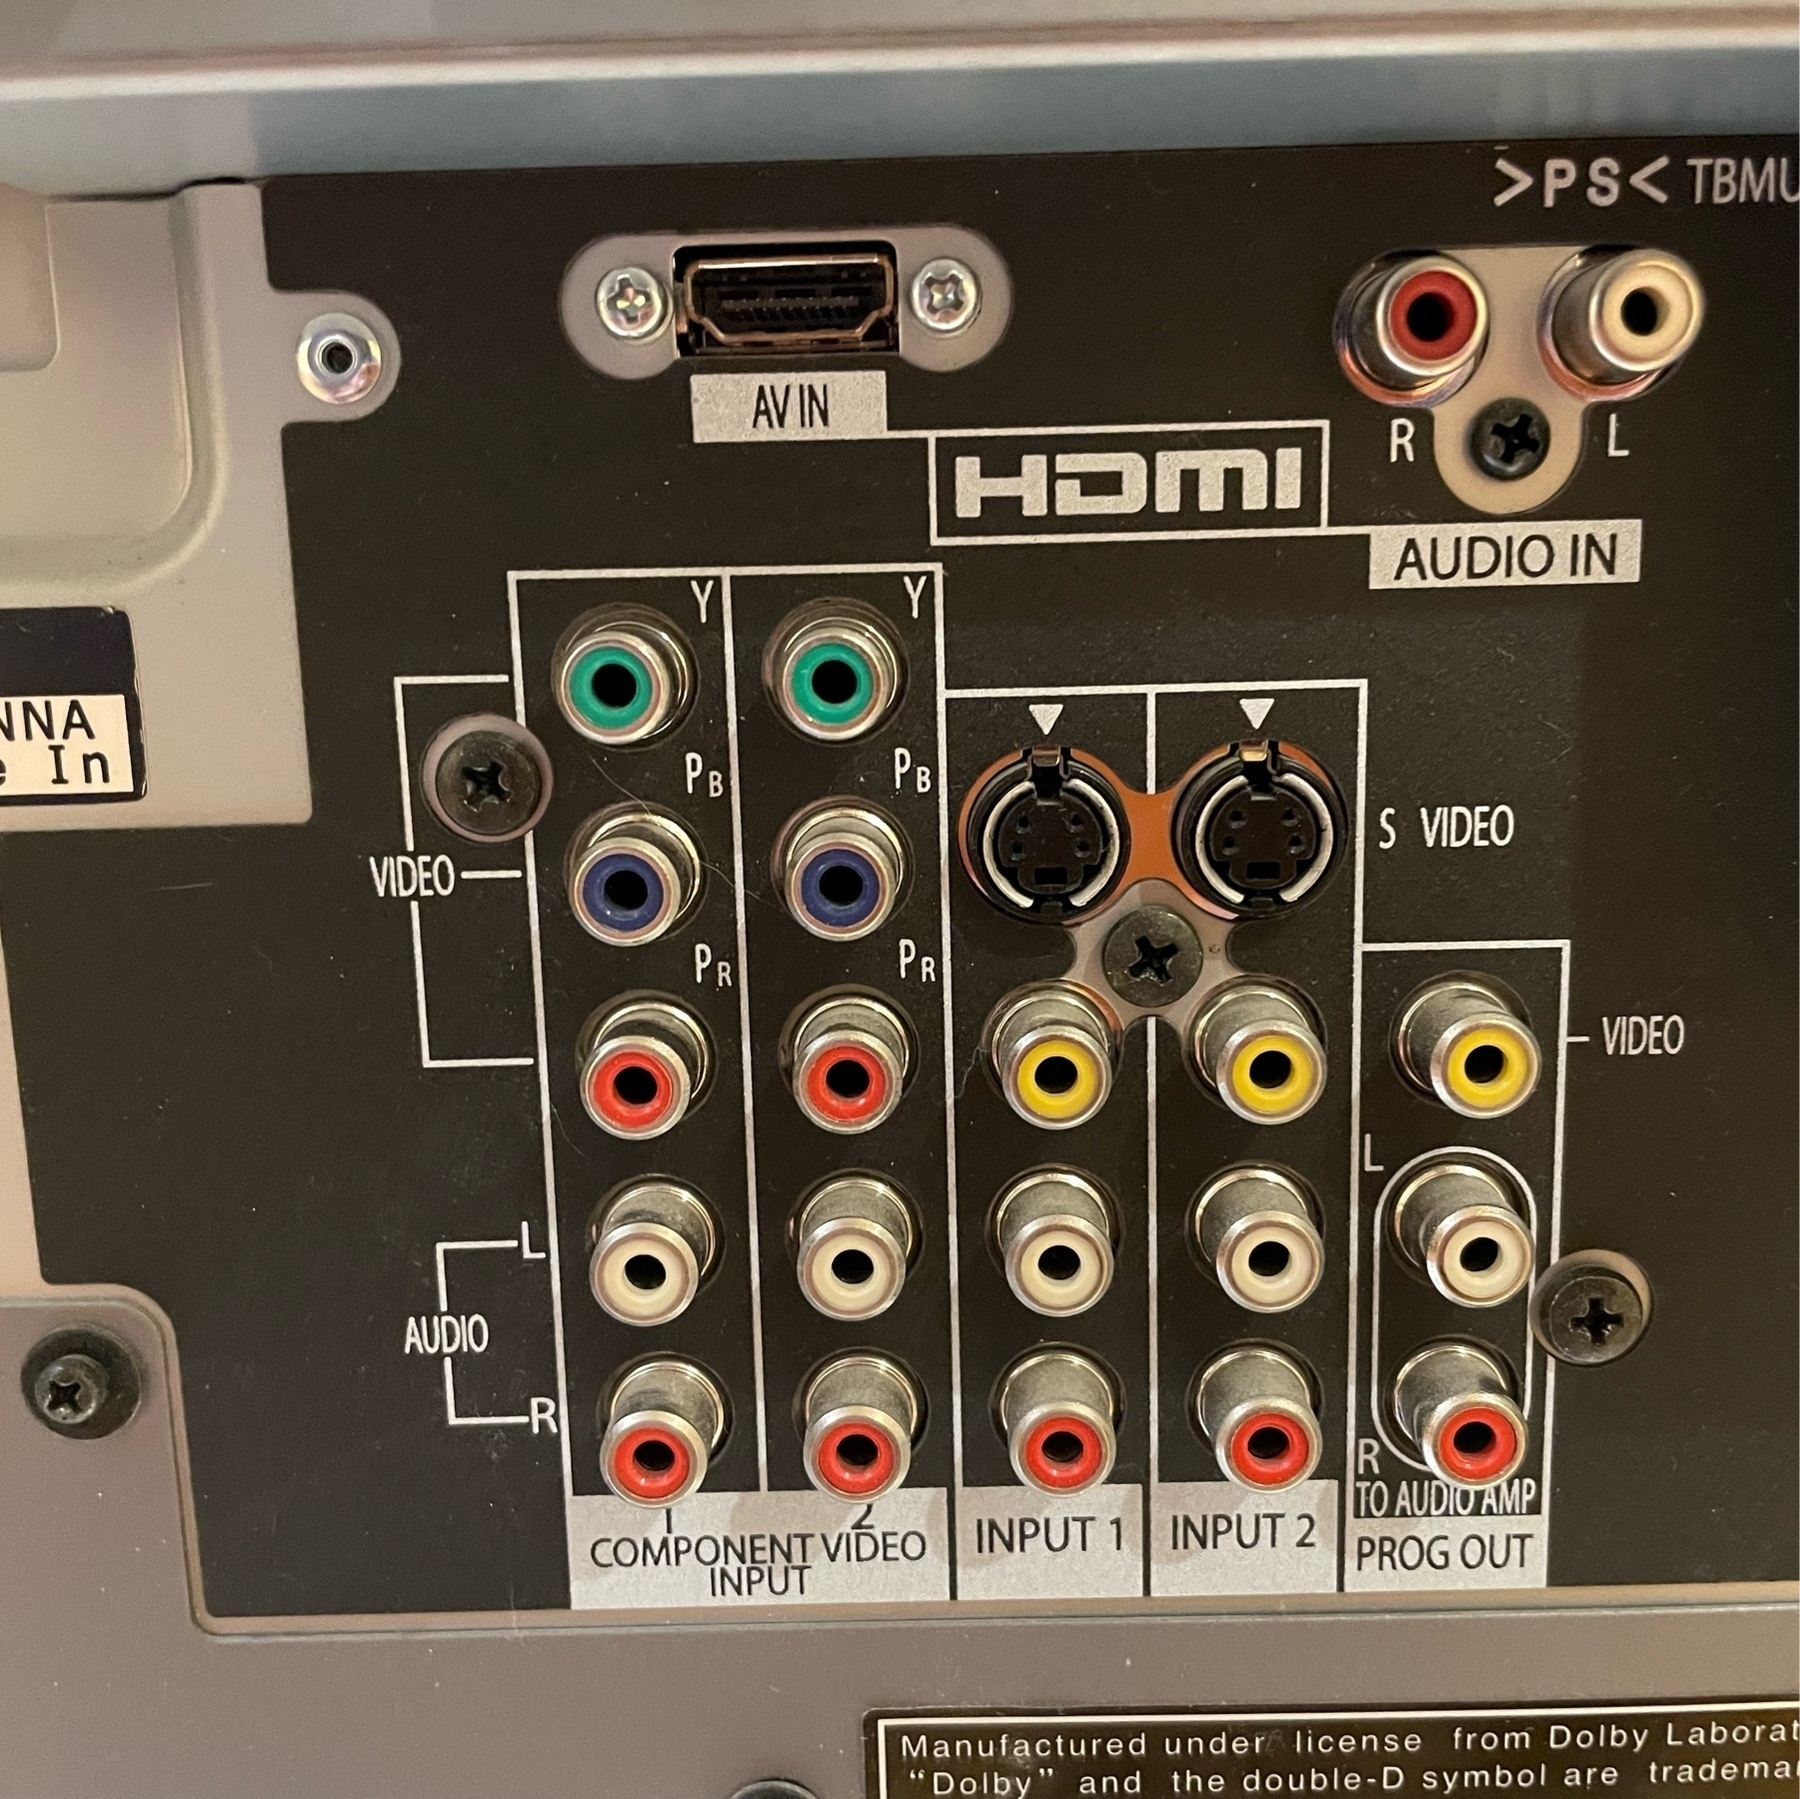 Back connection panel with component and s-video connections